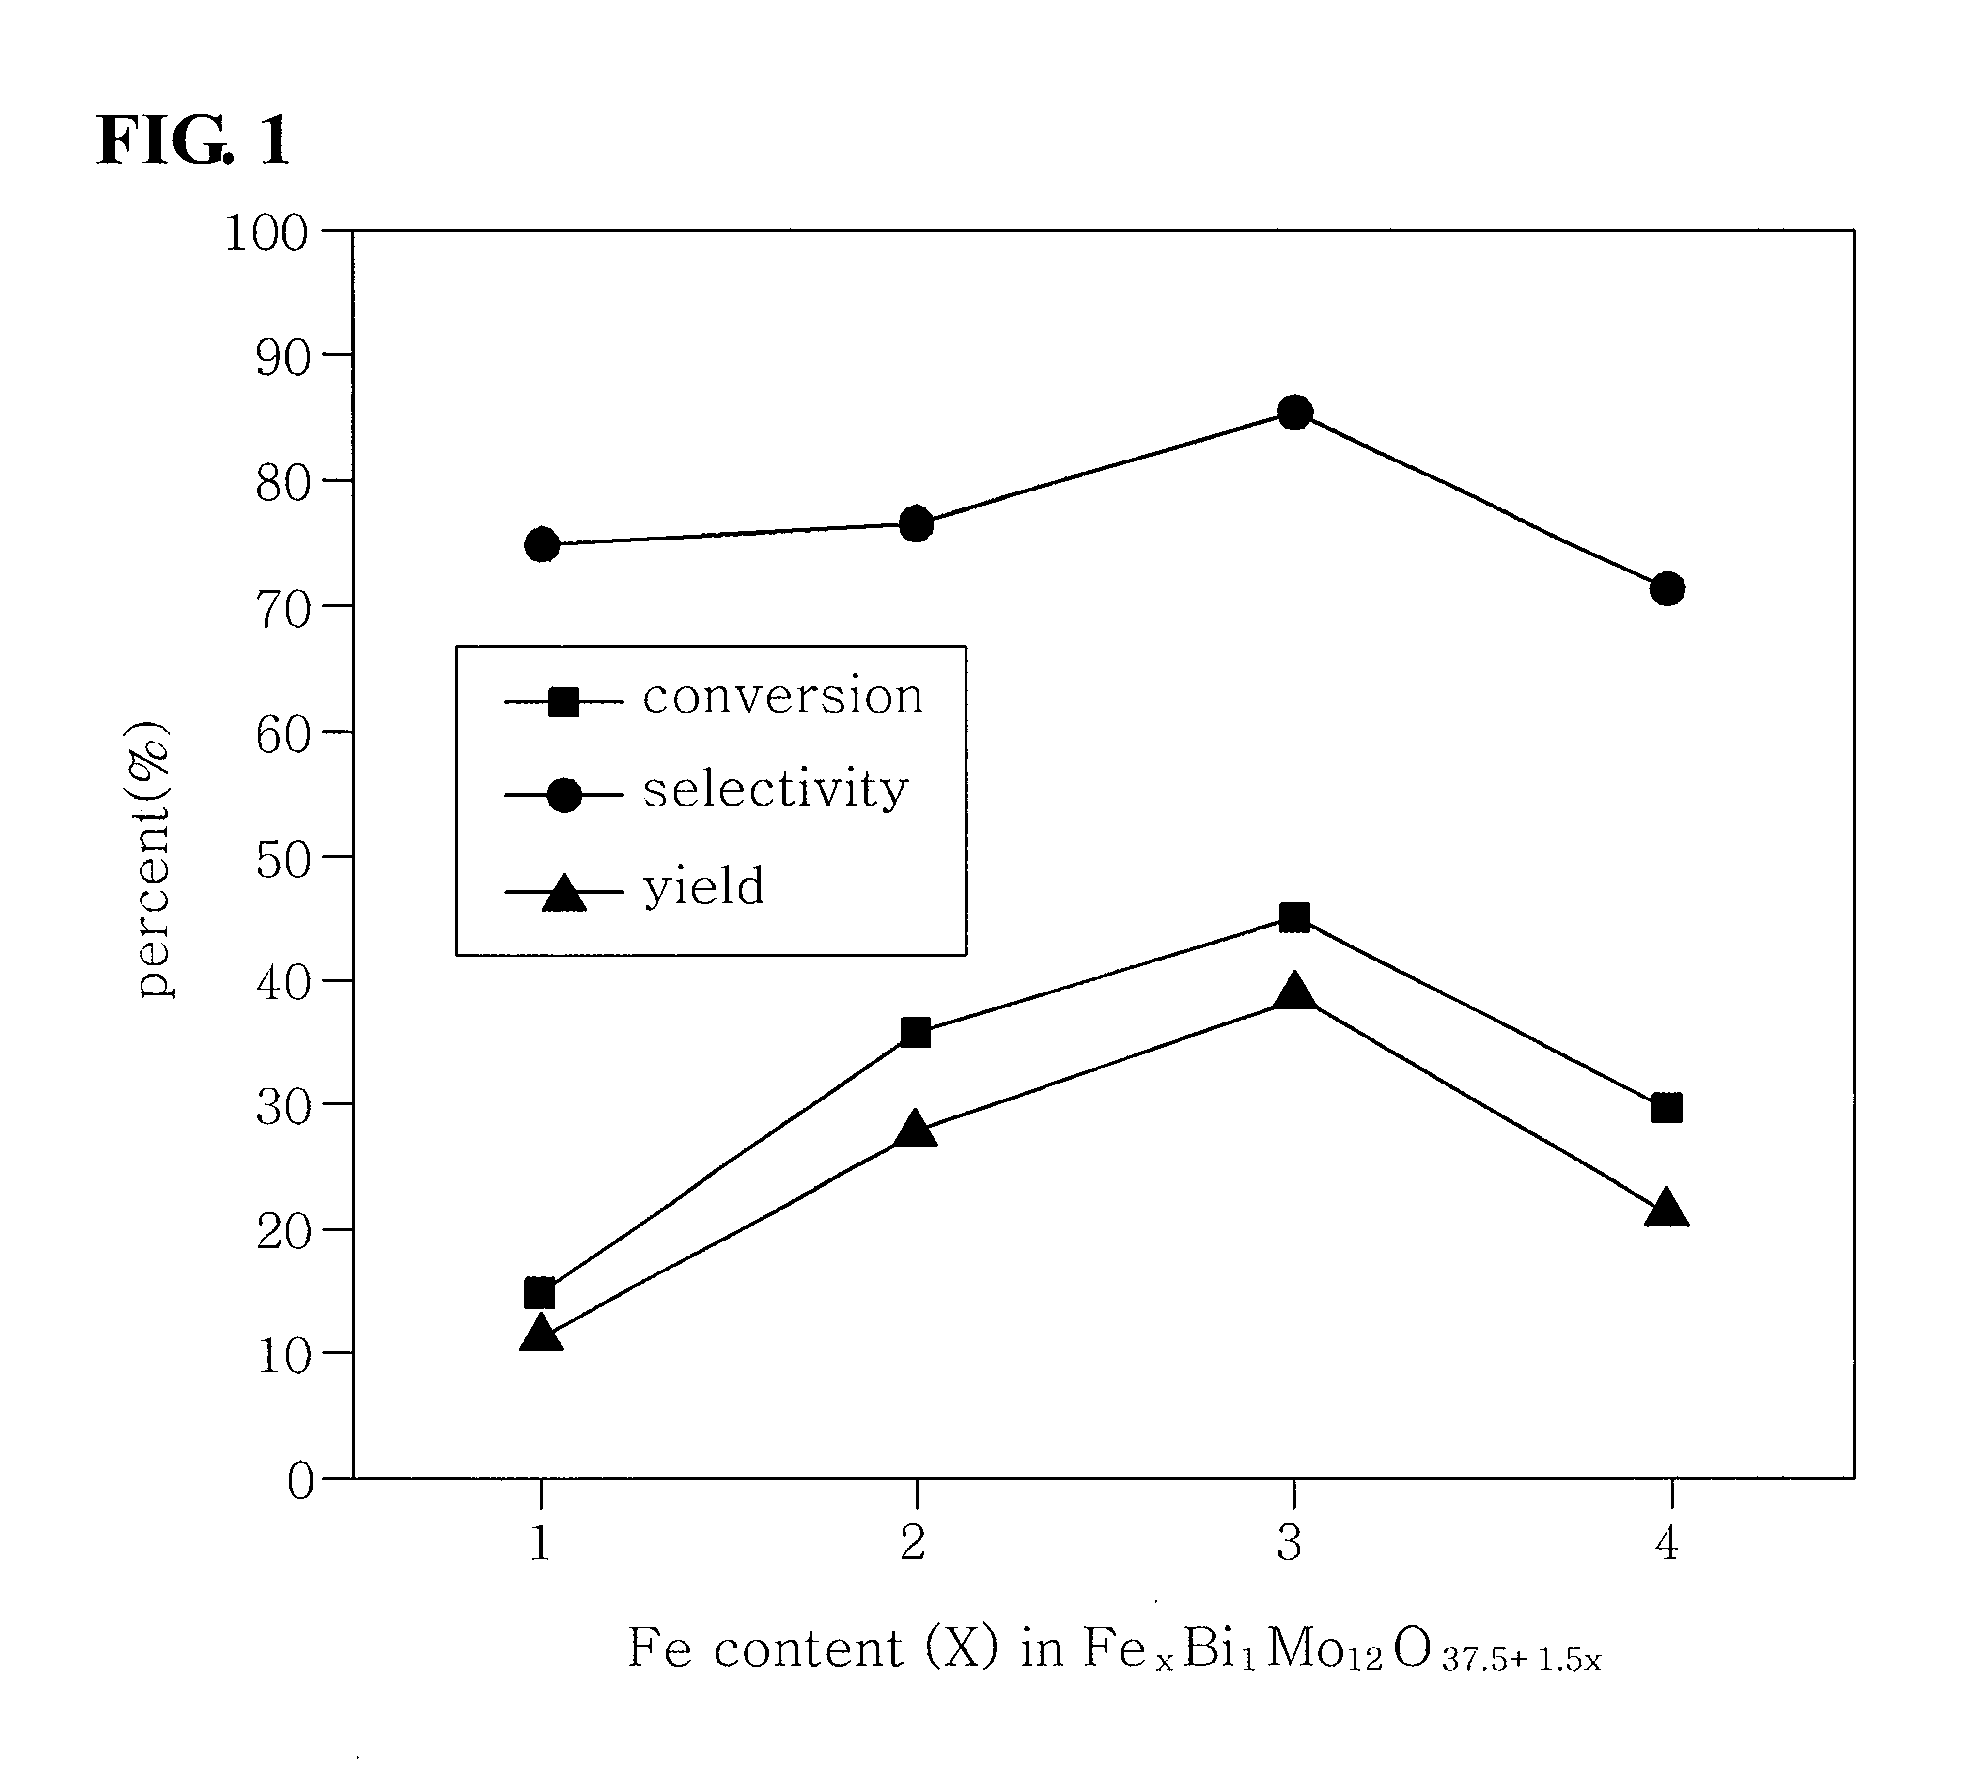 Method of preparing multicomponent bismuth molybdate catalysts comprising four metal components and method of preparing 1,3-butadiene using said catalysts